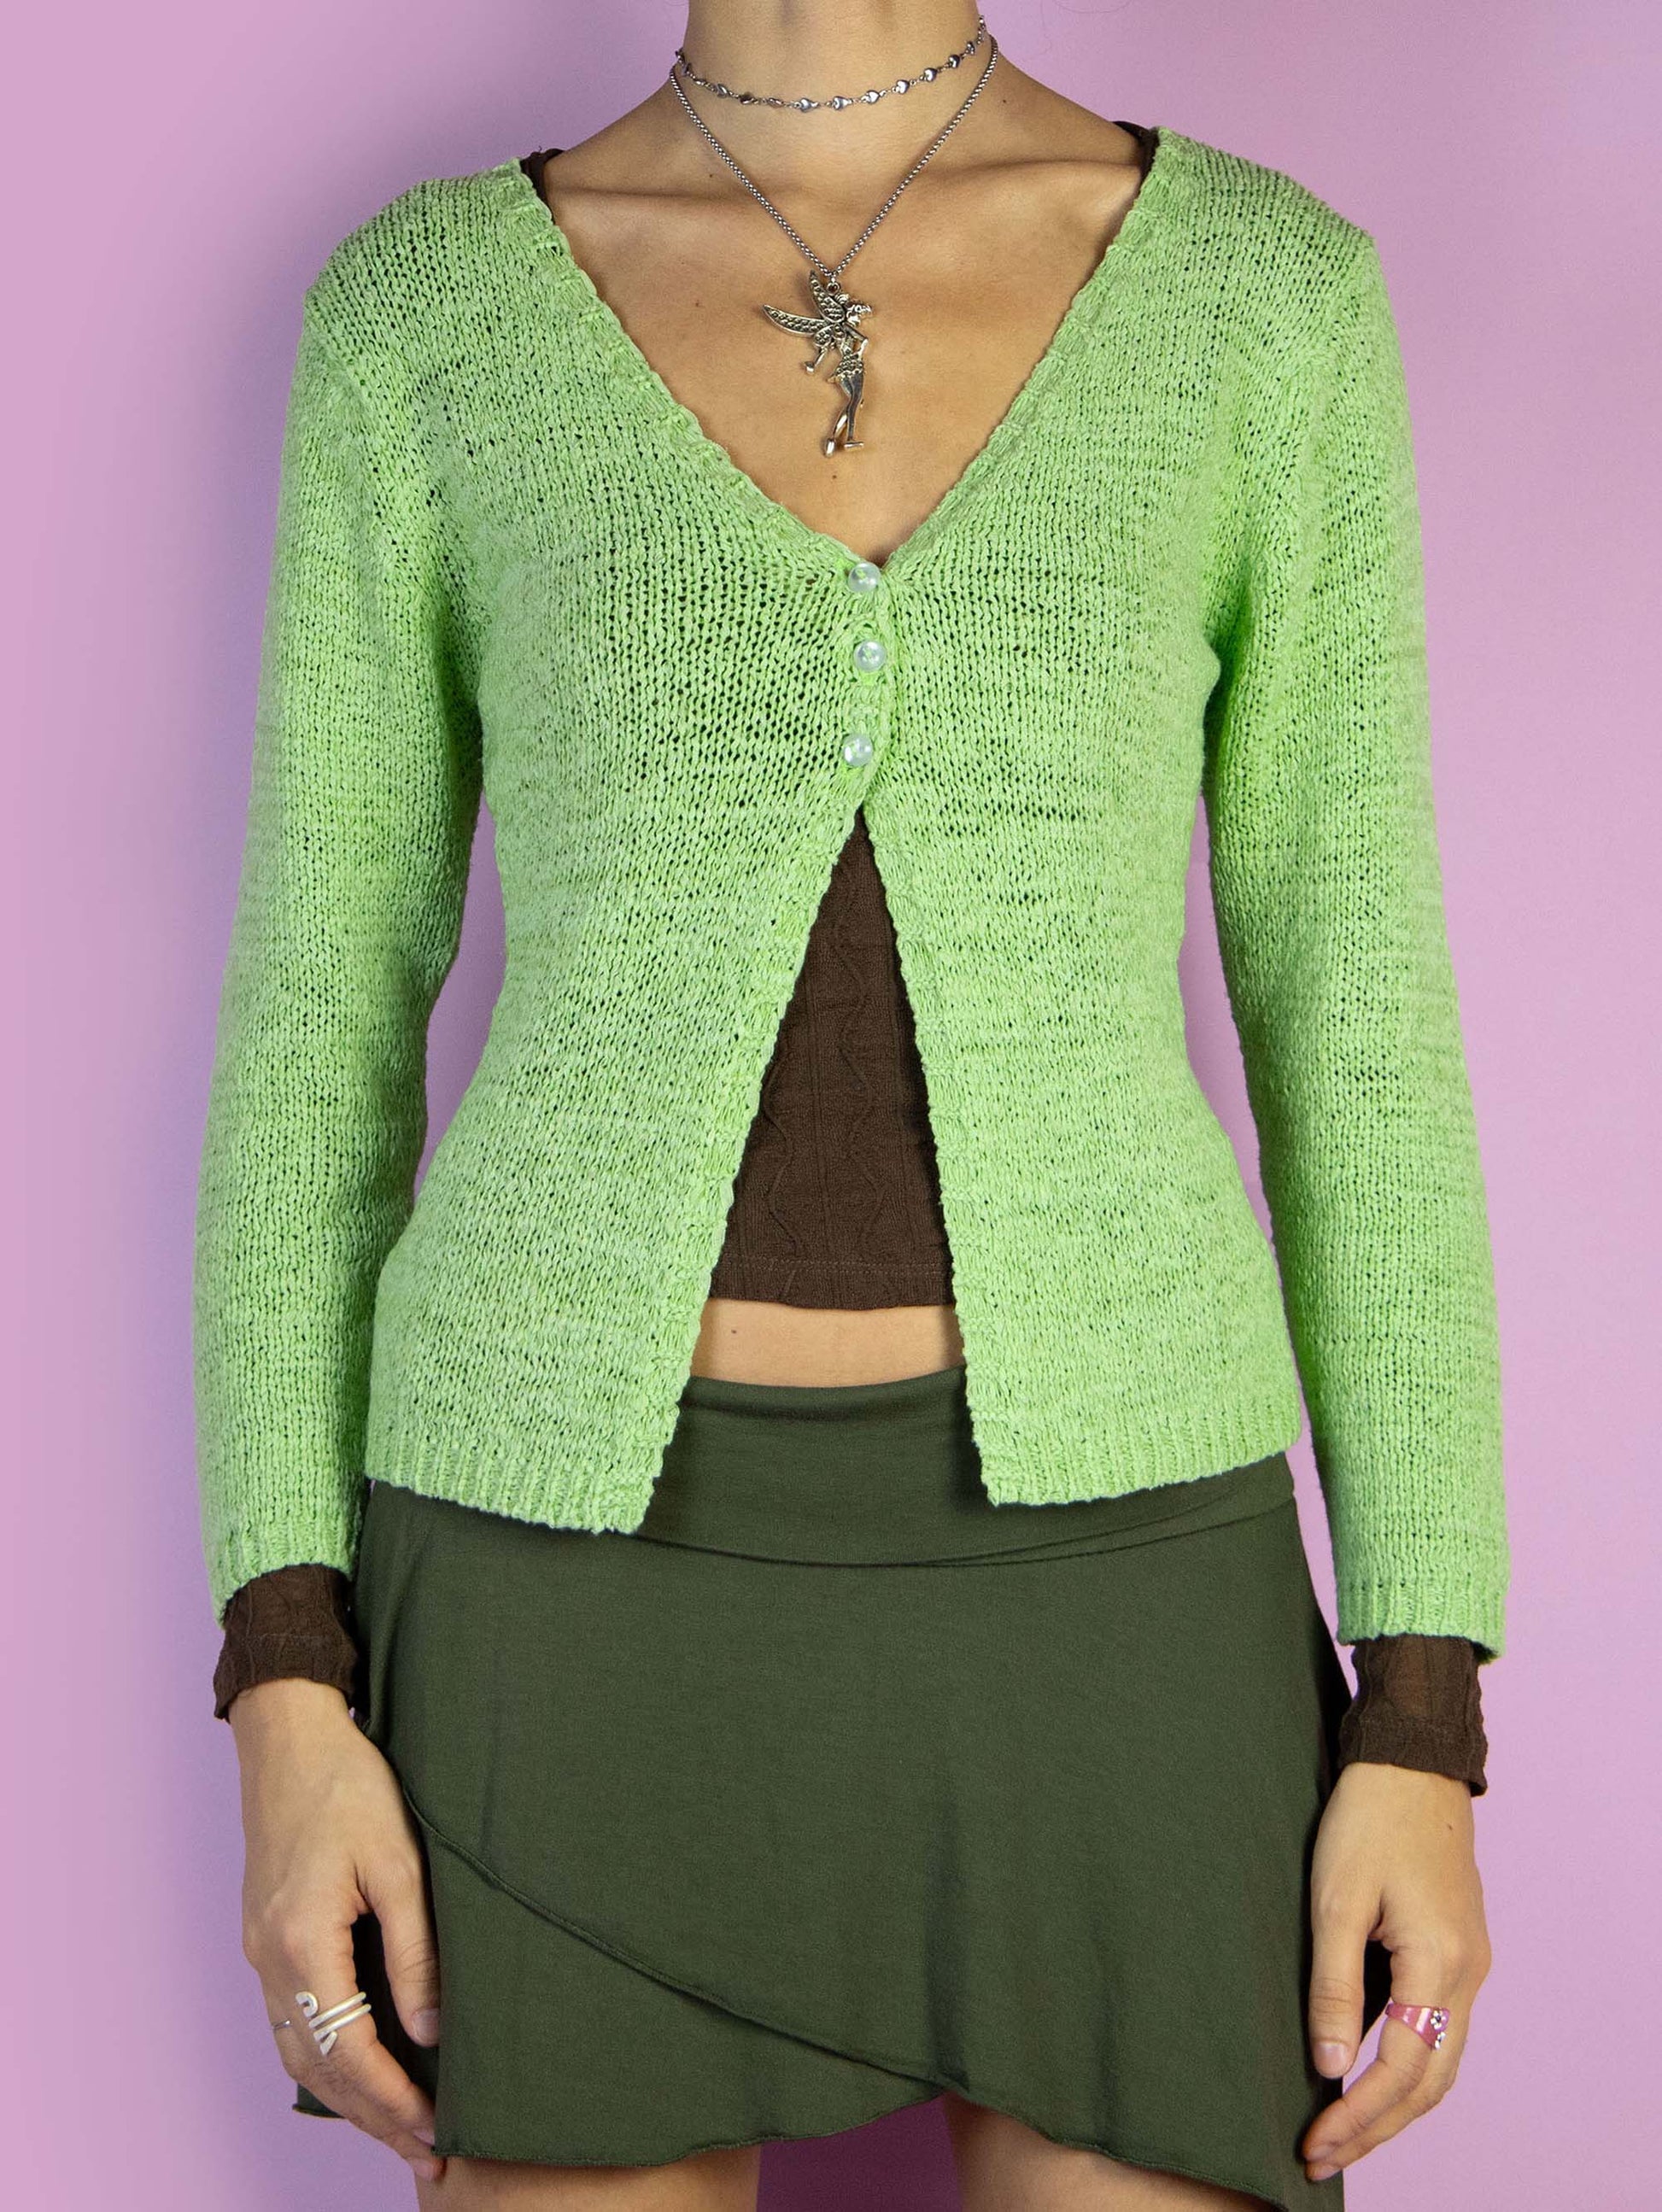 The Y2K Green Three Button Cardigan is a vintage green cardigan with a front slit, V-neck, three-quarter sleeves, and a closure with three buttons. Cyber fairy grunge 2000s knitted sweater.